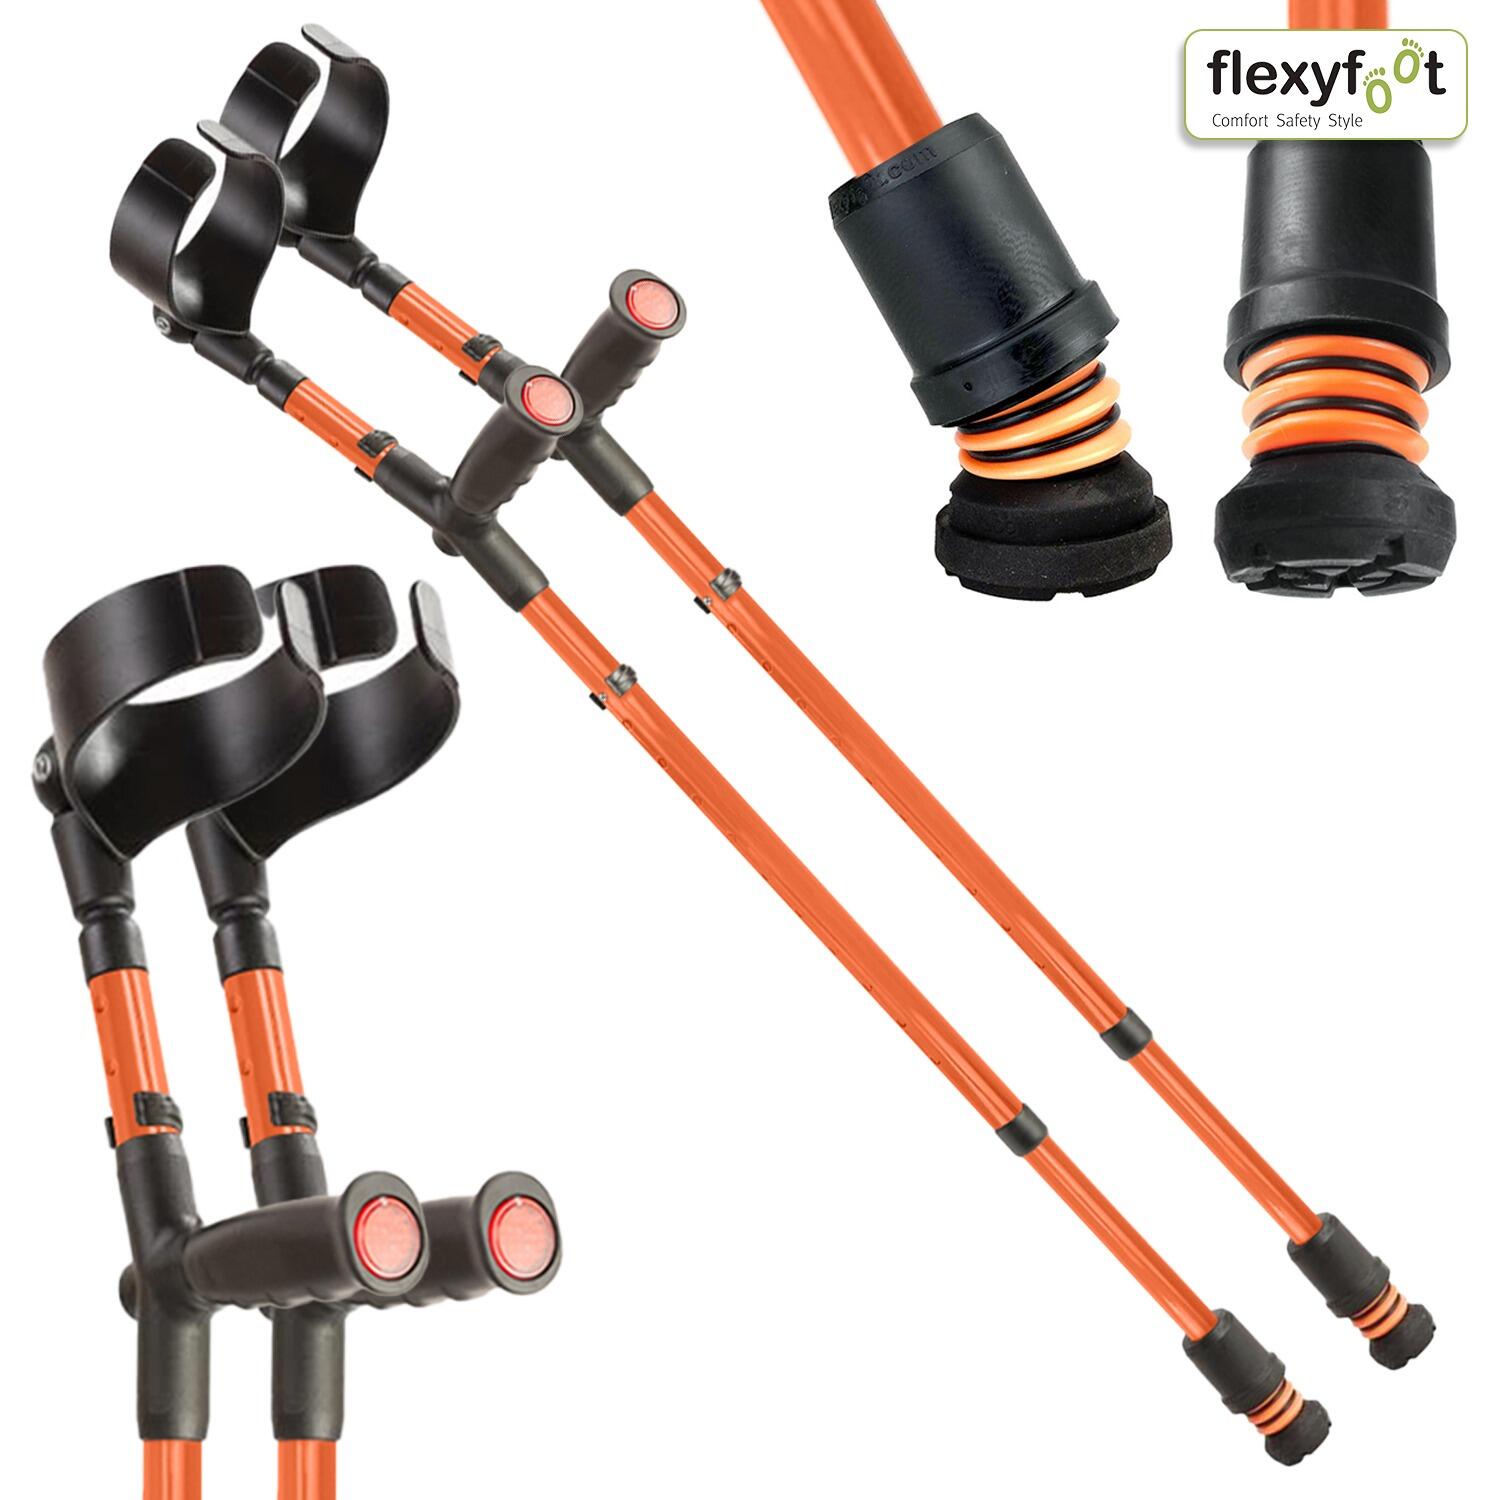 A pair of orange Flexyfoot Soft Grip Double Adjustable Crutches